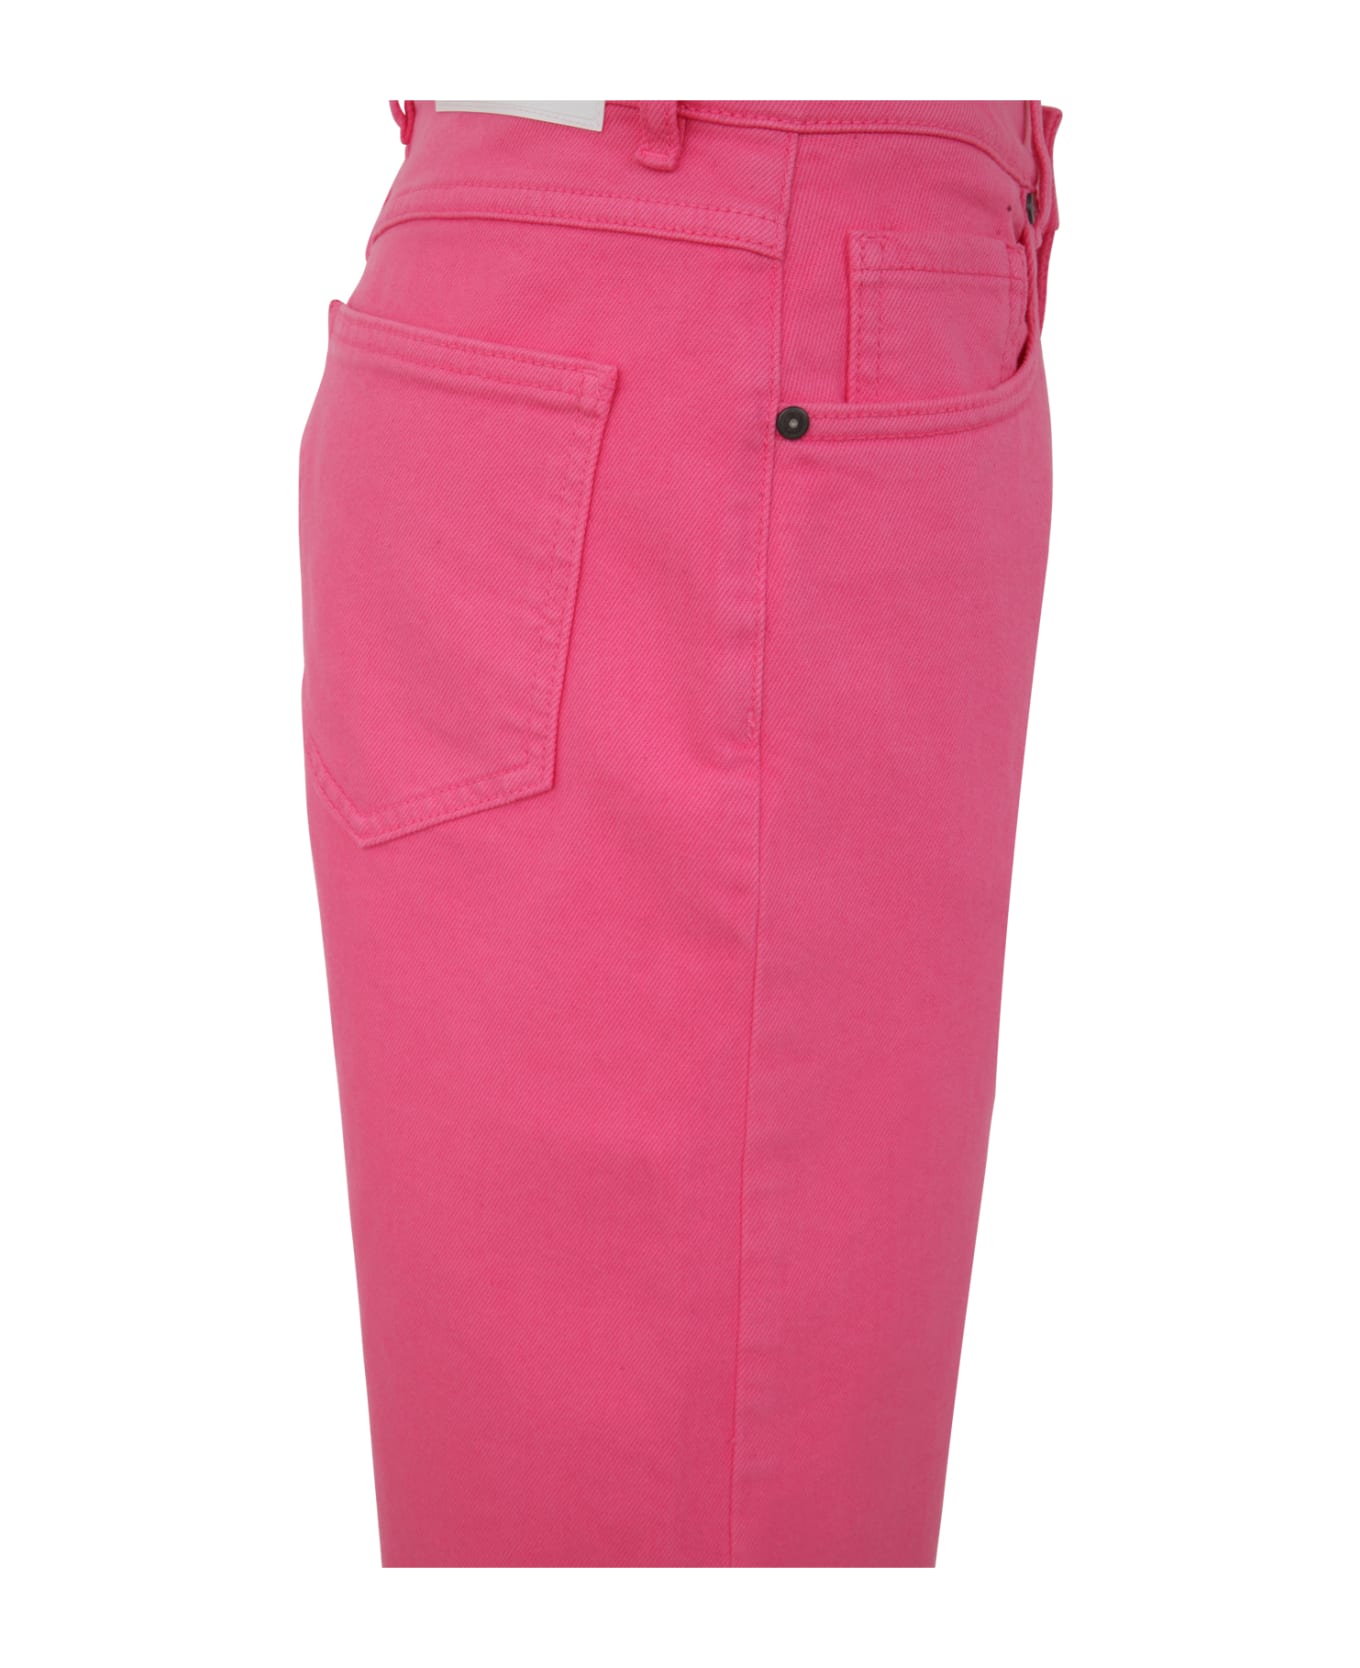 Parosh Drill Cotton Trousers - Pink ボトムス